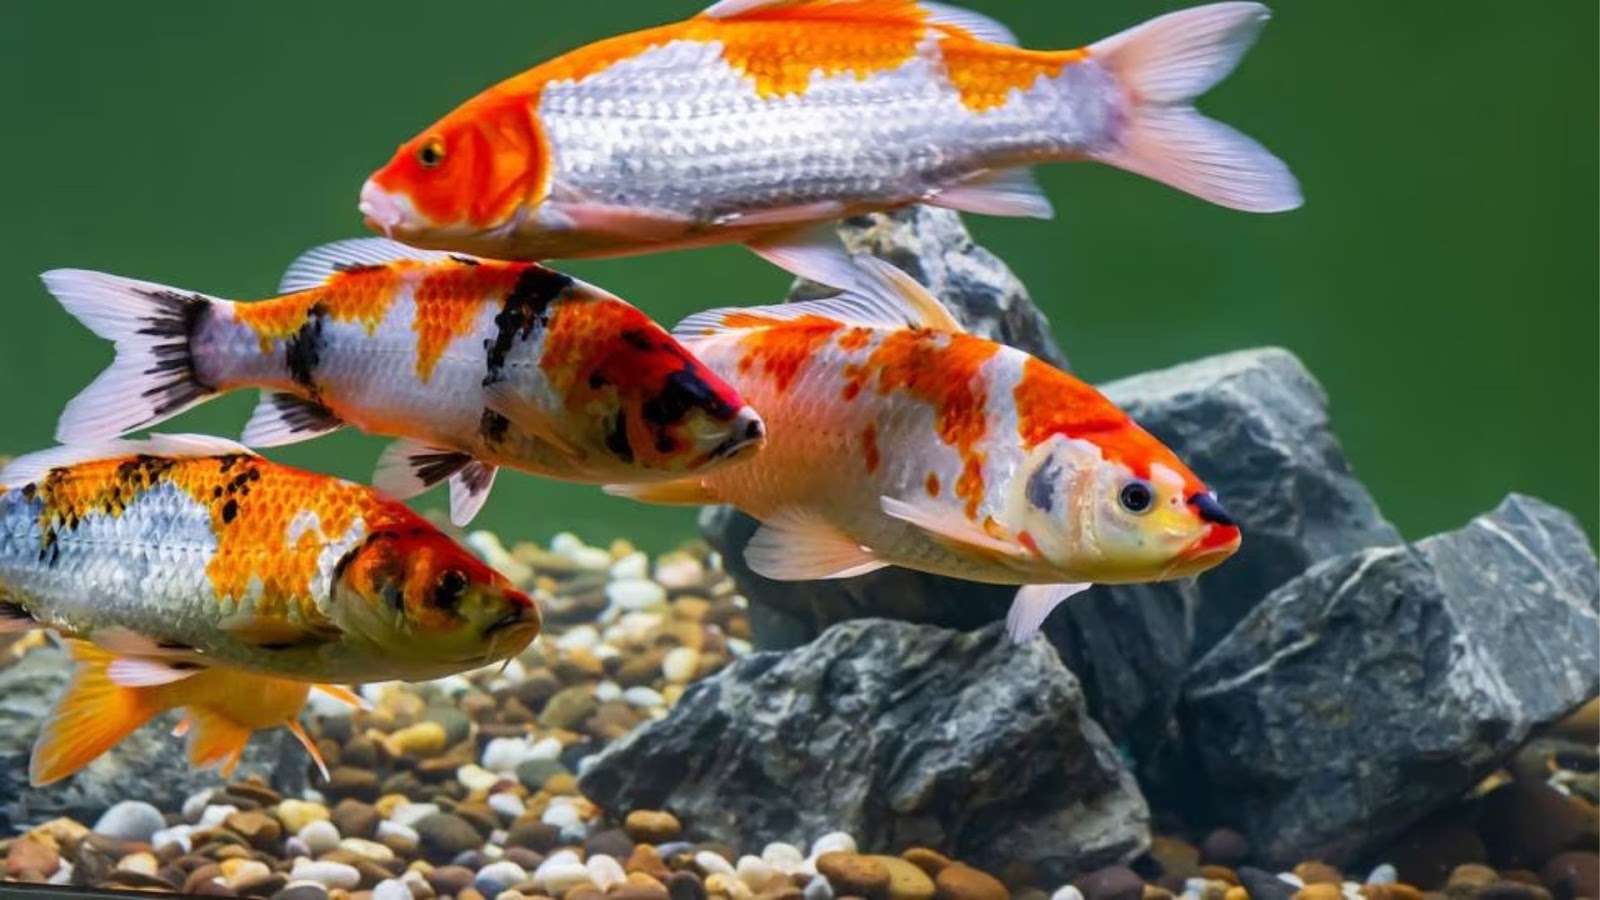 Lucky fish for home: Koi Fish